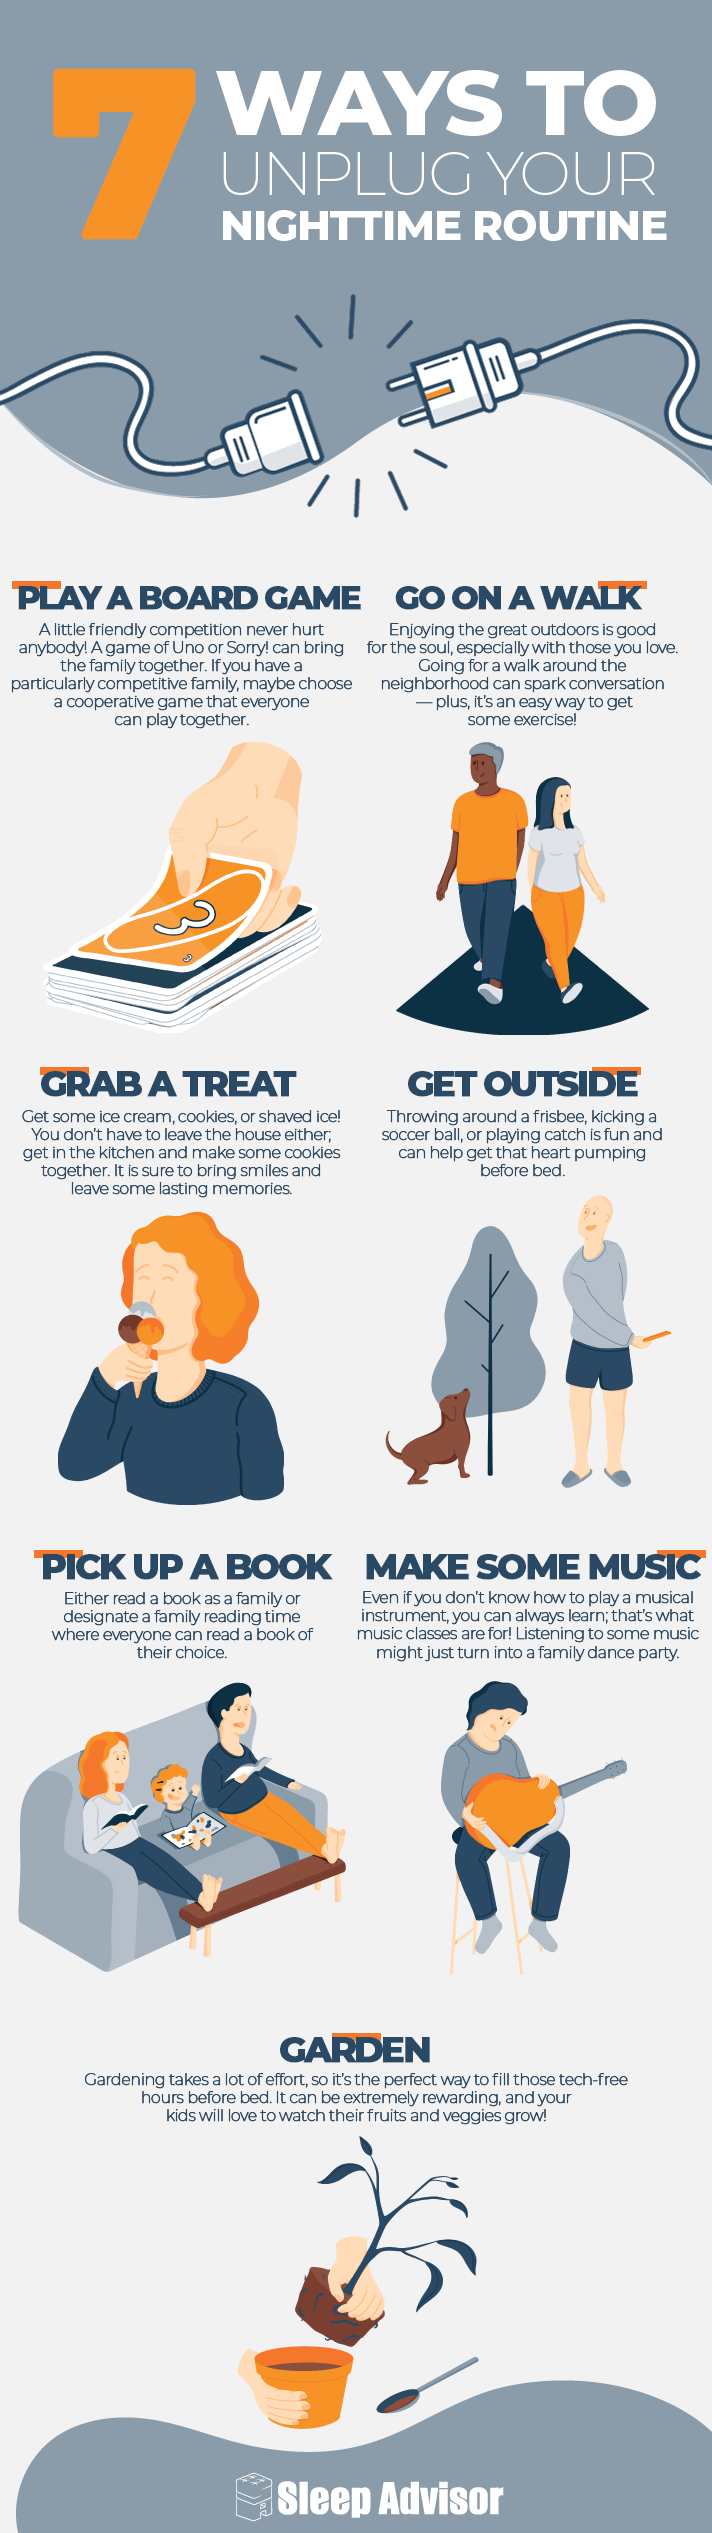 7 Ways To Unplug Your Nighttime Routine Infographic